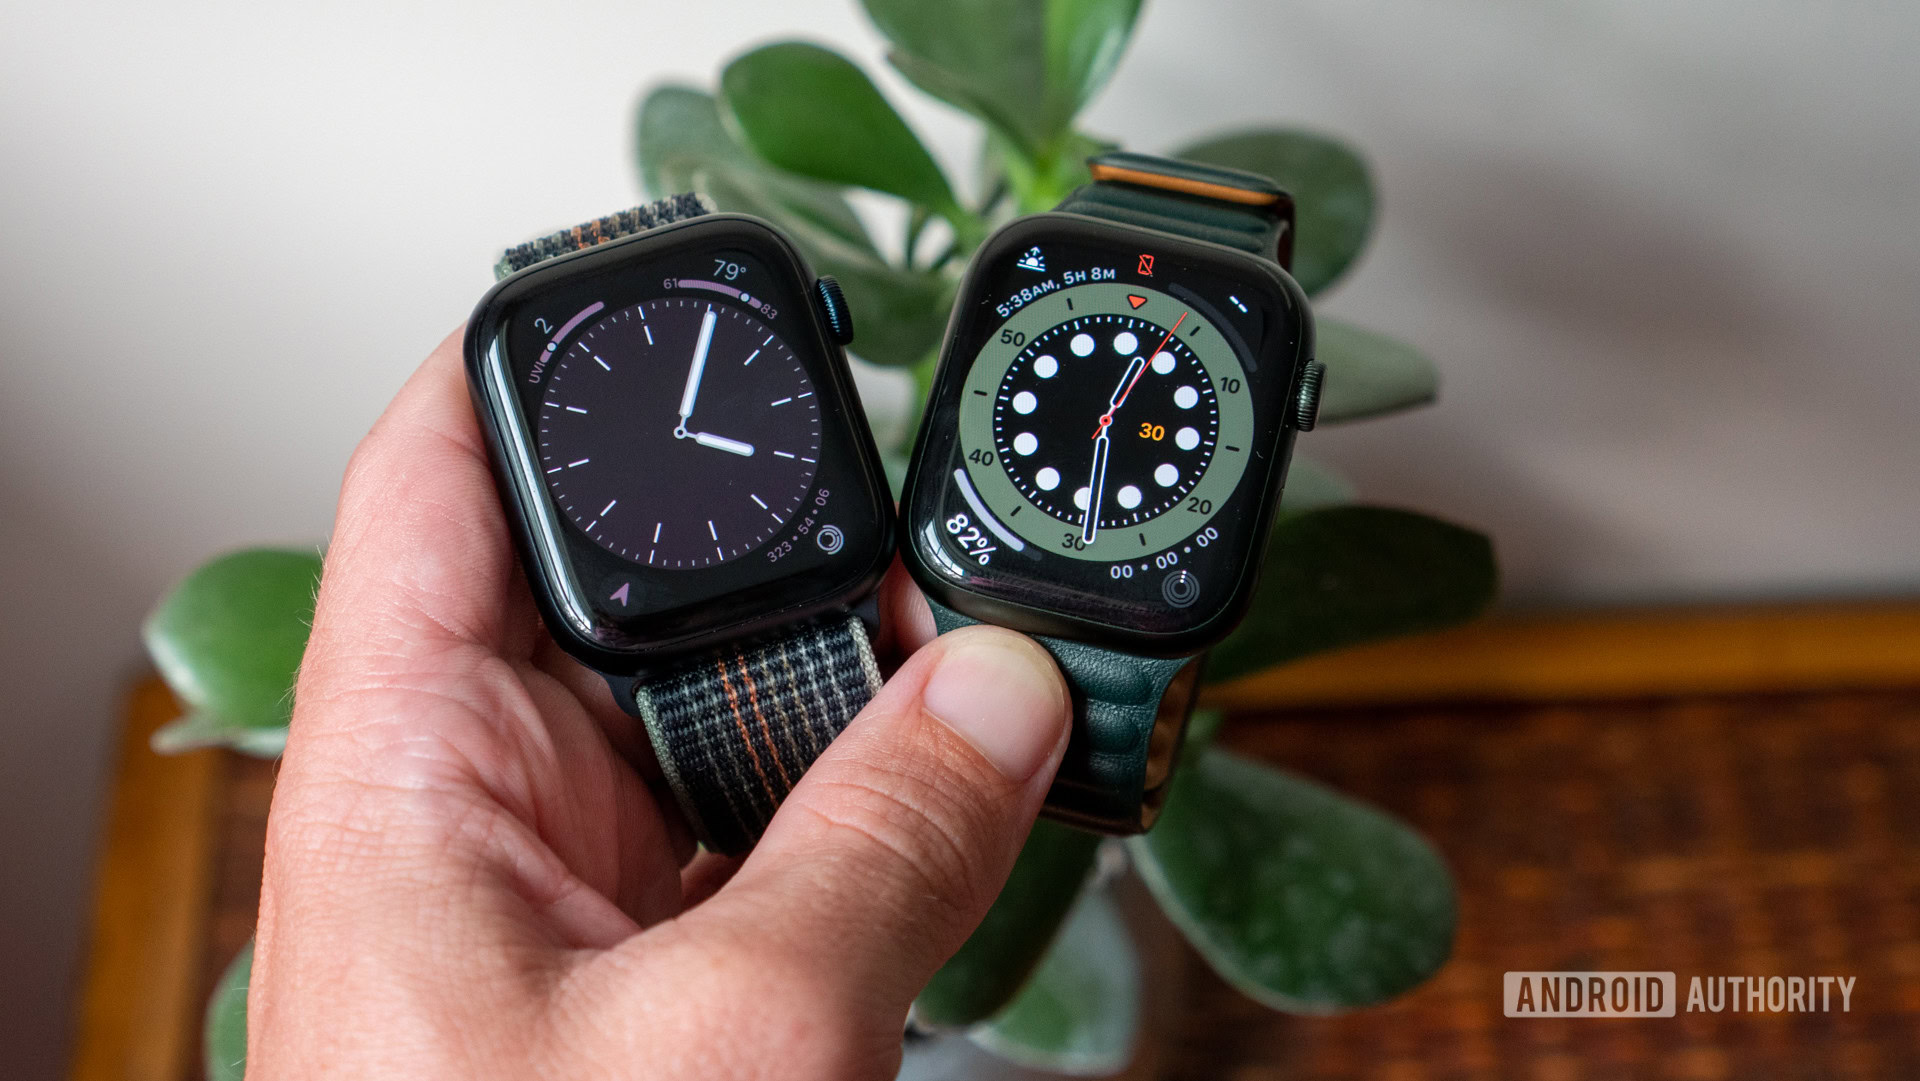 Apple Watch vs Garmin: Which is the platform? Android Authority